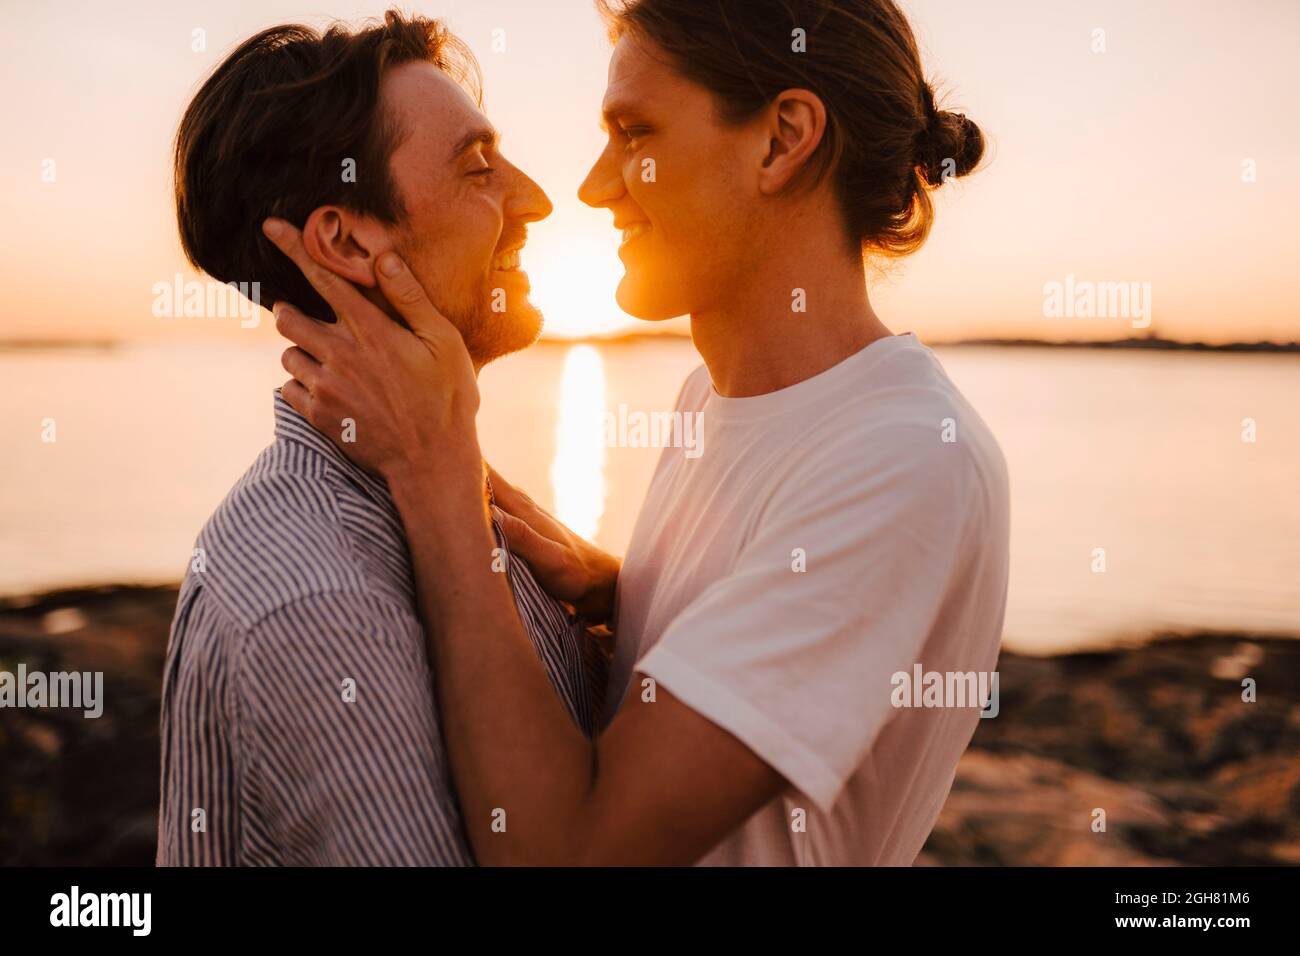 Smiling gay couple standing face to face at lakeshore during sunset Stock Photo